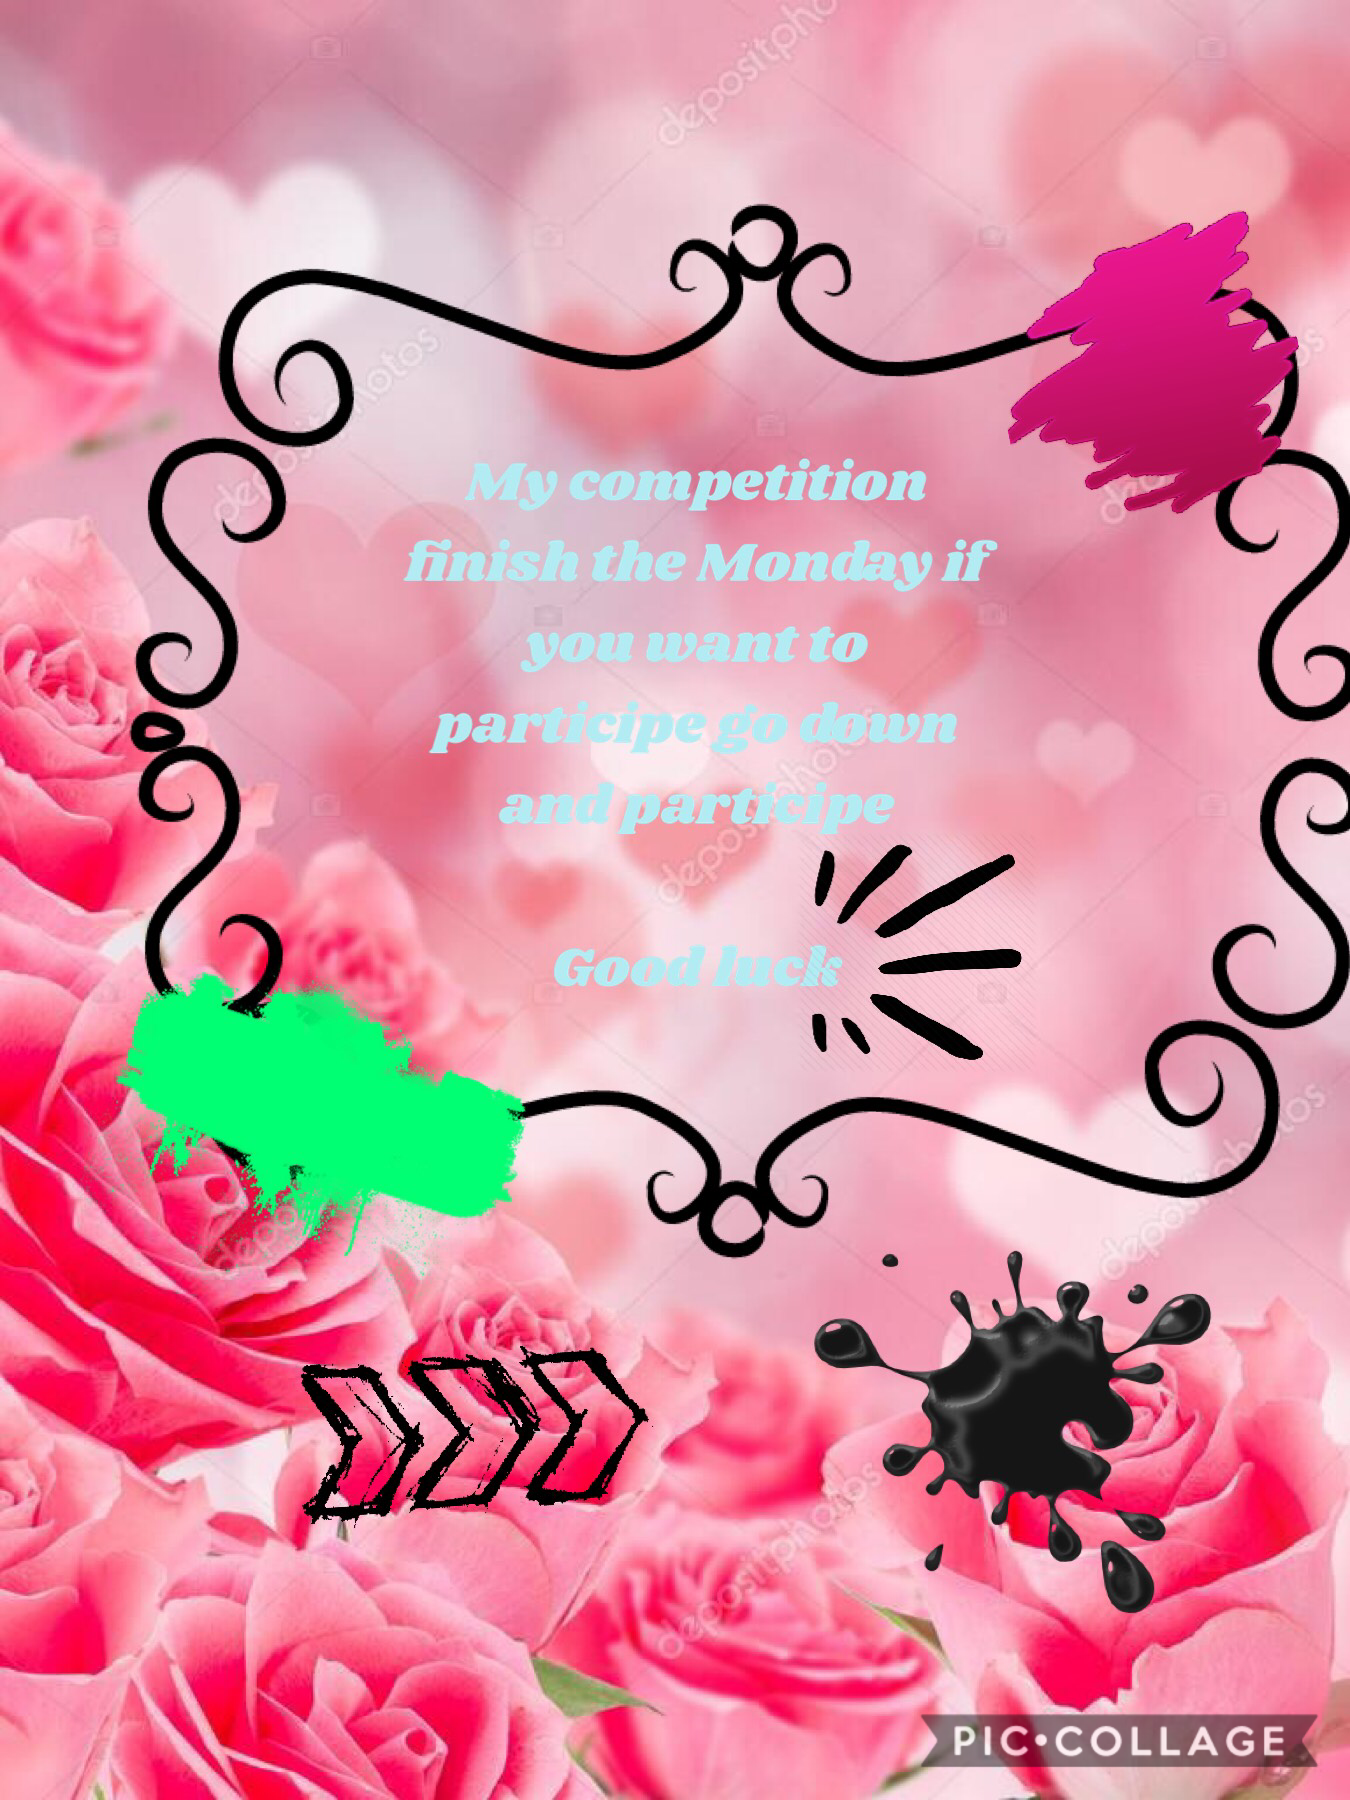 Participe !! In my competition